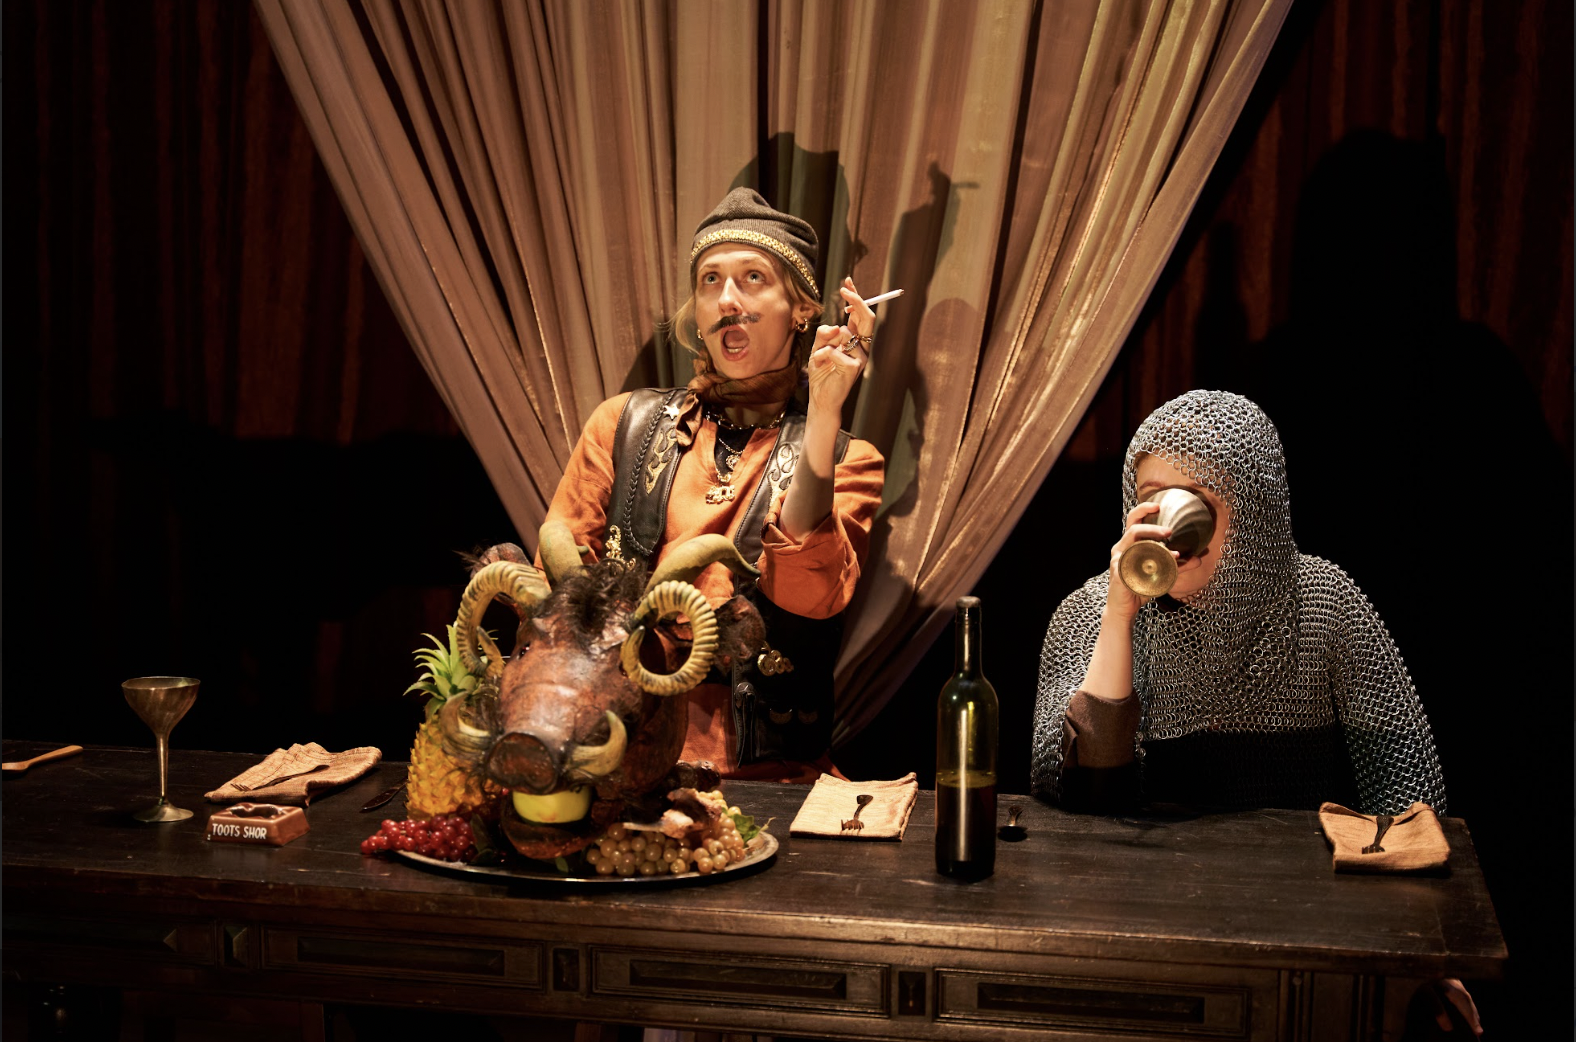 An actor holding a cigarette sits at a table in front of a roasted boar's head next to an actor wearing chainmail armor and drinking from a chalice